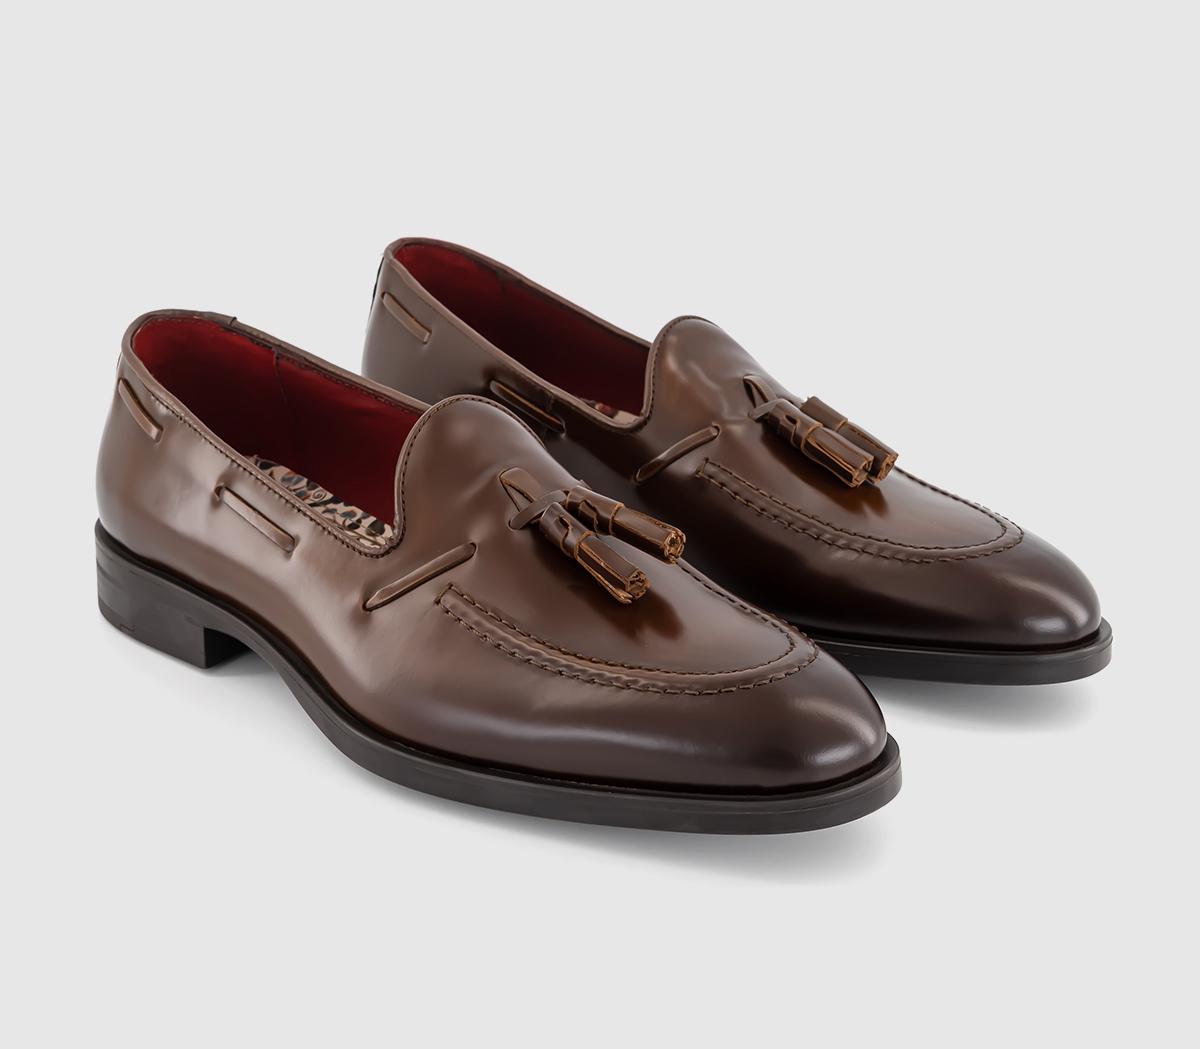 Poste Painswick Tassel Loafers Tan Leather - Men’s Loafers